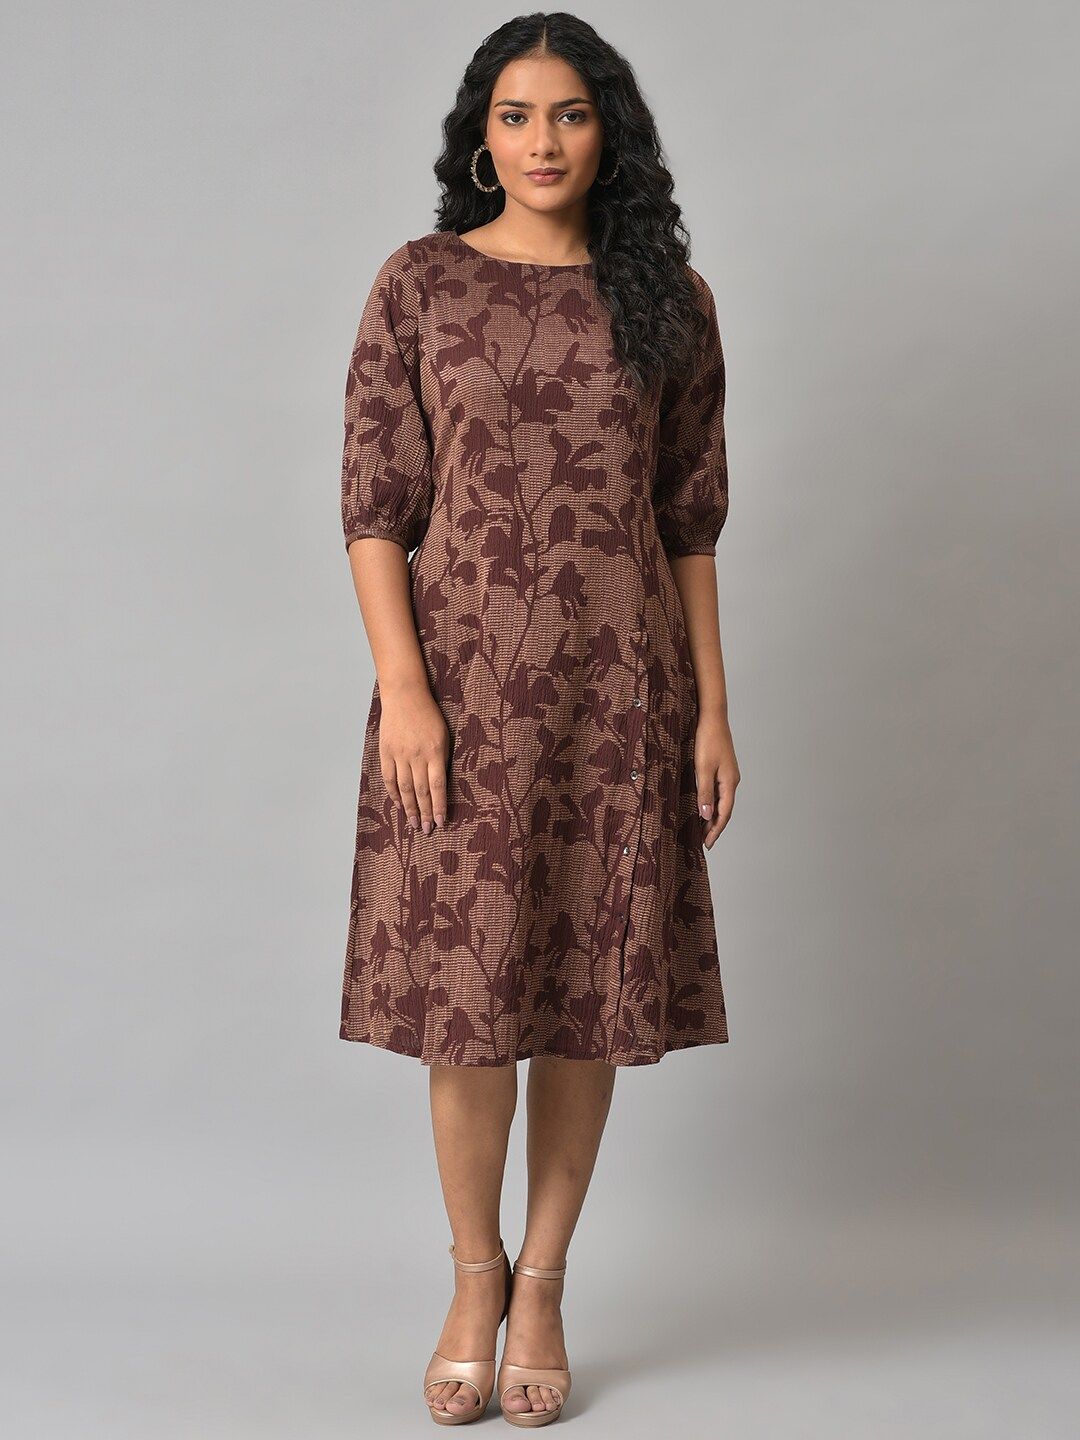 W Brown Floral A-Line Dress Price in India